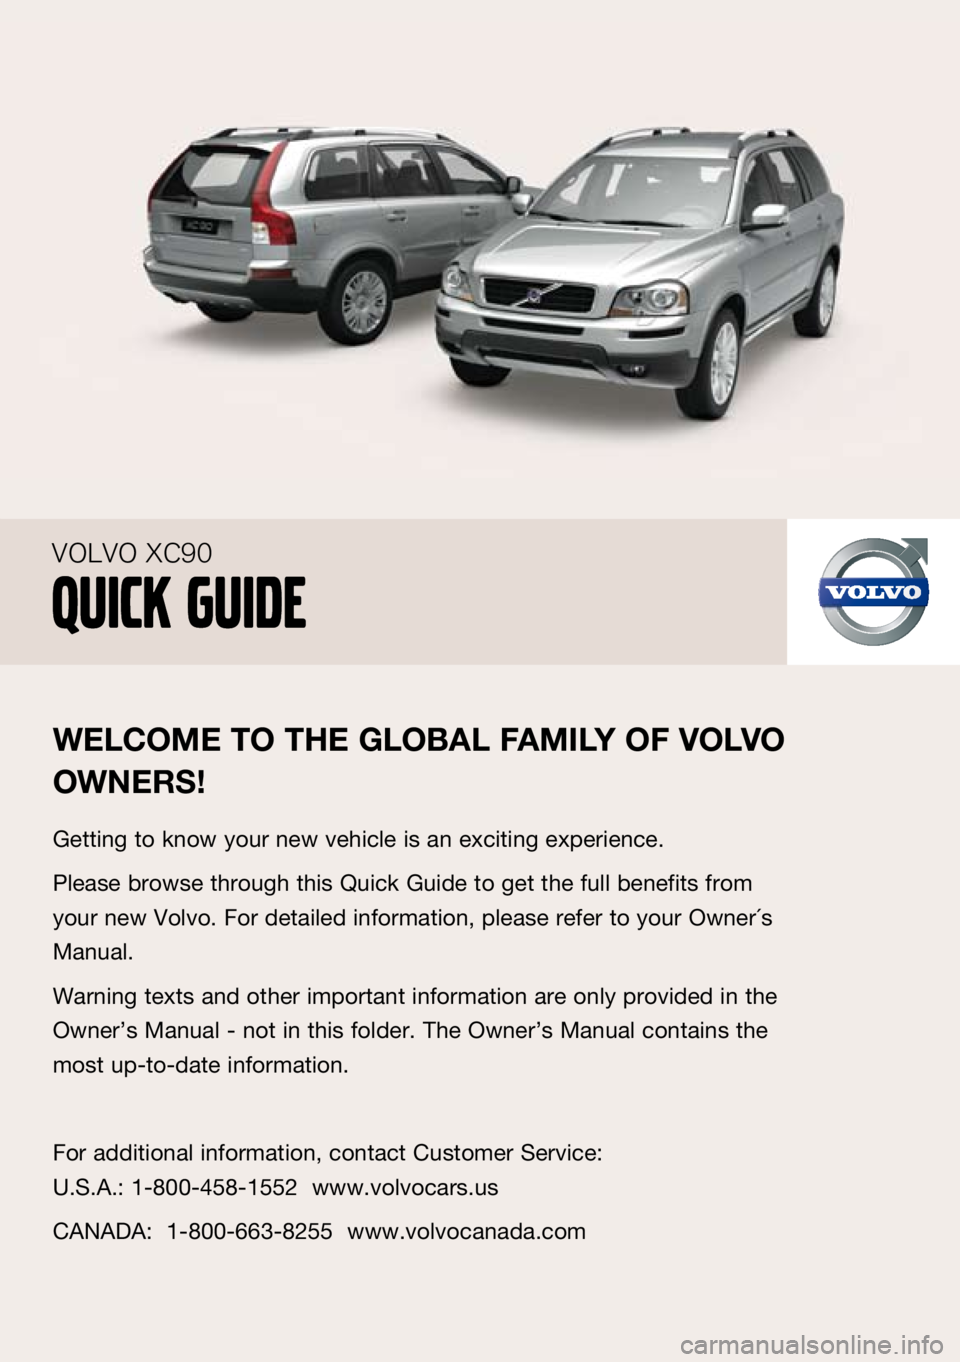 VOLVO XC90 2009  Quick Guide 
welcOme TO TH e gl ObAl FA mIly OF  vO lv O 
O wne RS!
Getting to know your new vehicle is an exciting experience.
Please browse through this Quick Guide to get the full benefits from 
your new Volvo